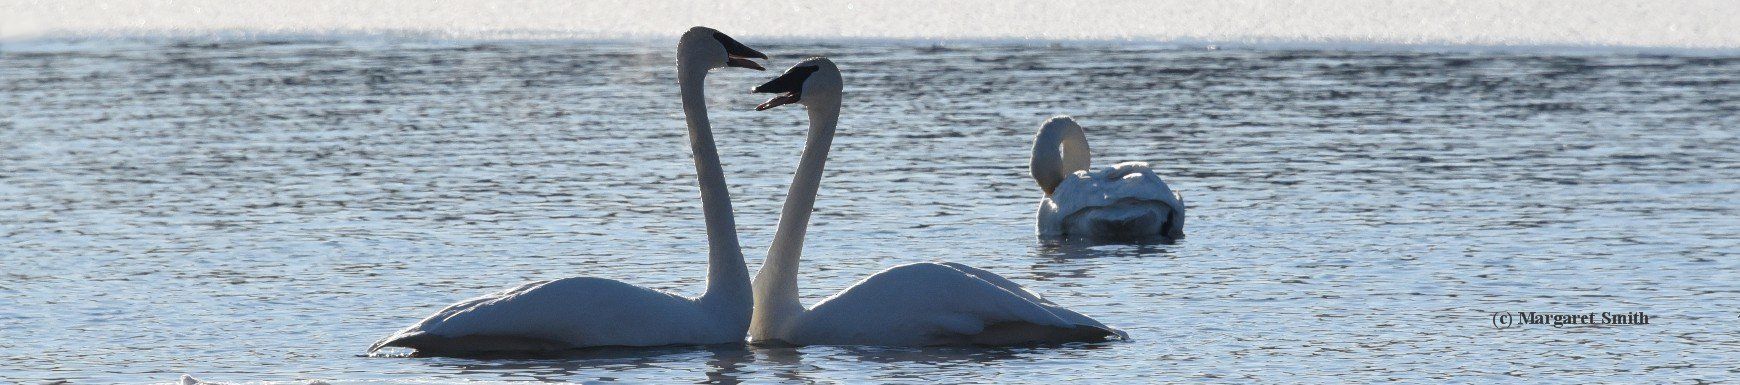 When purchasing through Amazon Smile, choose Trumpeter Swan Society to support swan conservation